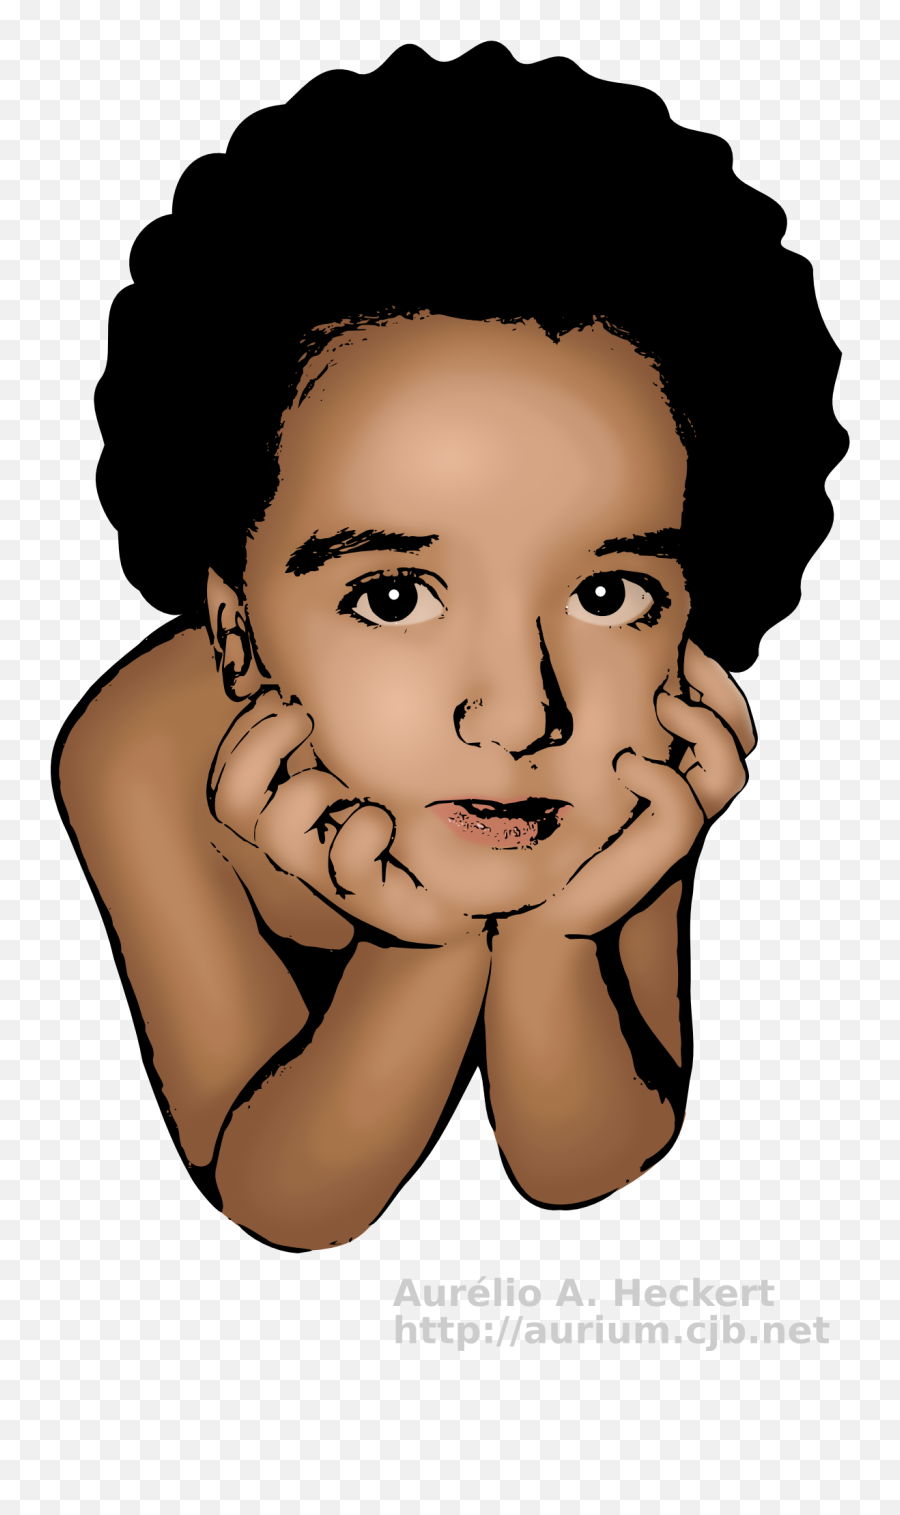 Face Of The Thinking Child Clipart Free - Portable Network Graphics Emoji,Child Clipart